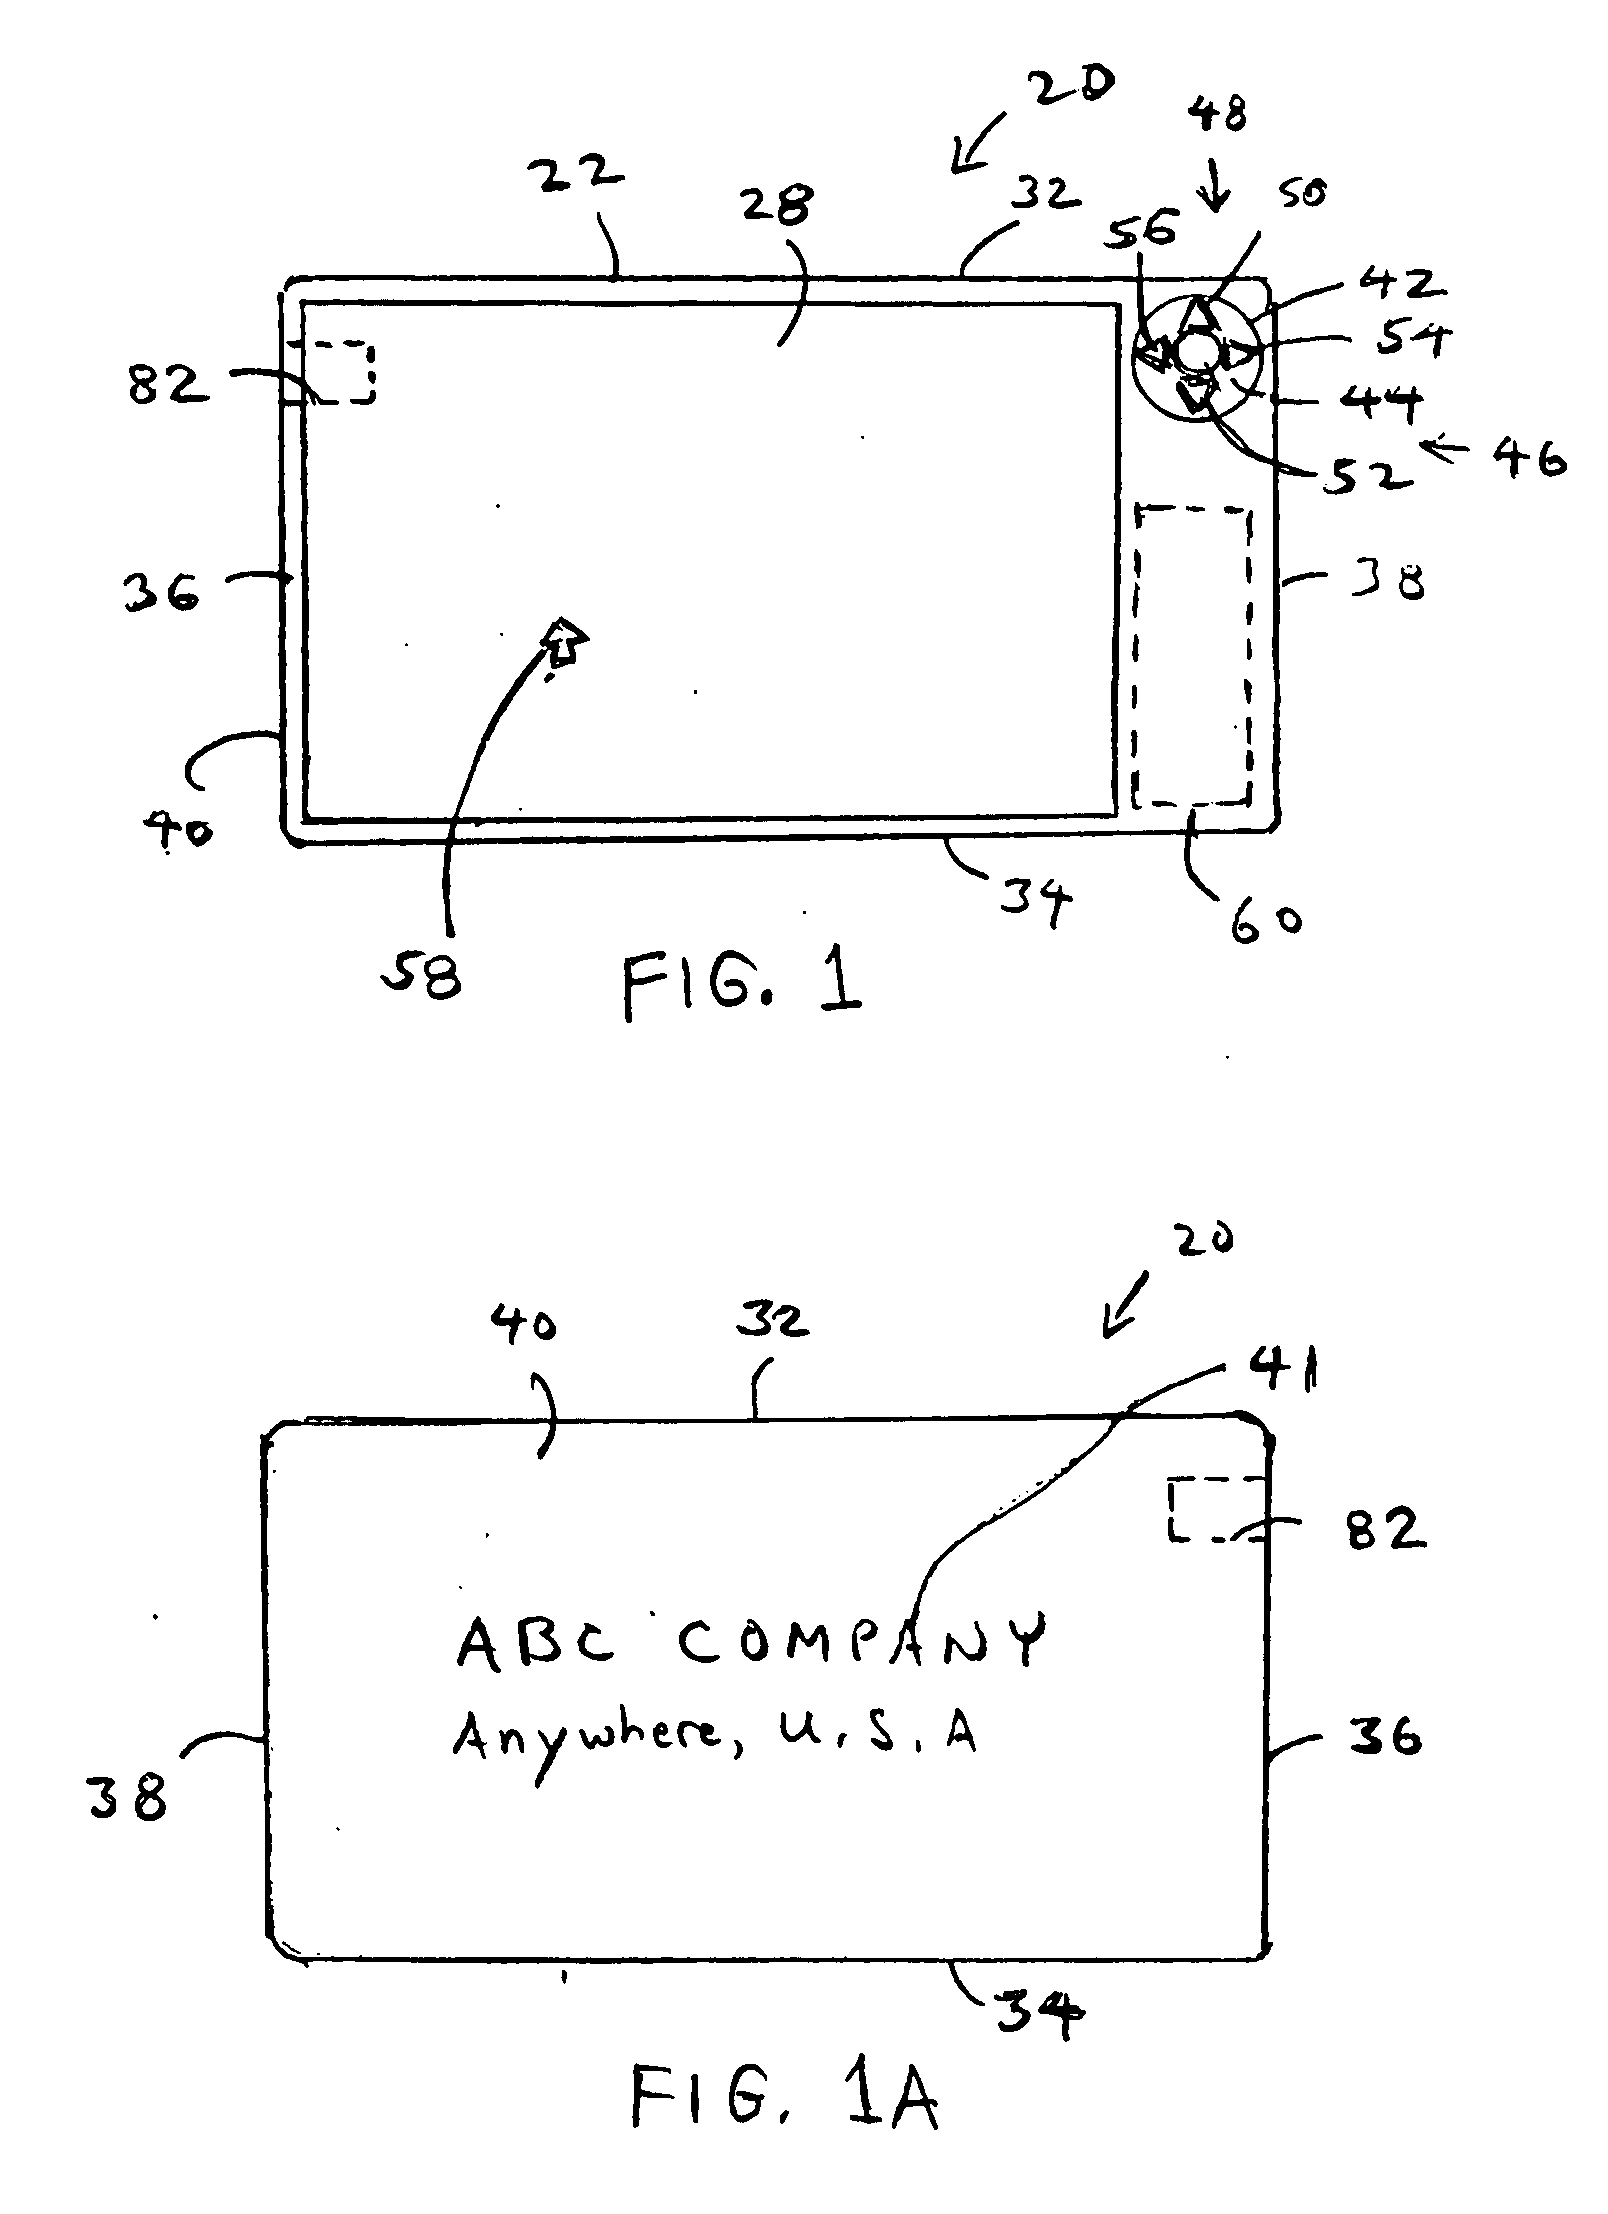 Compact electronic unit with display